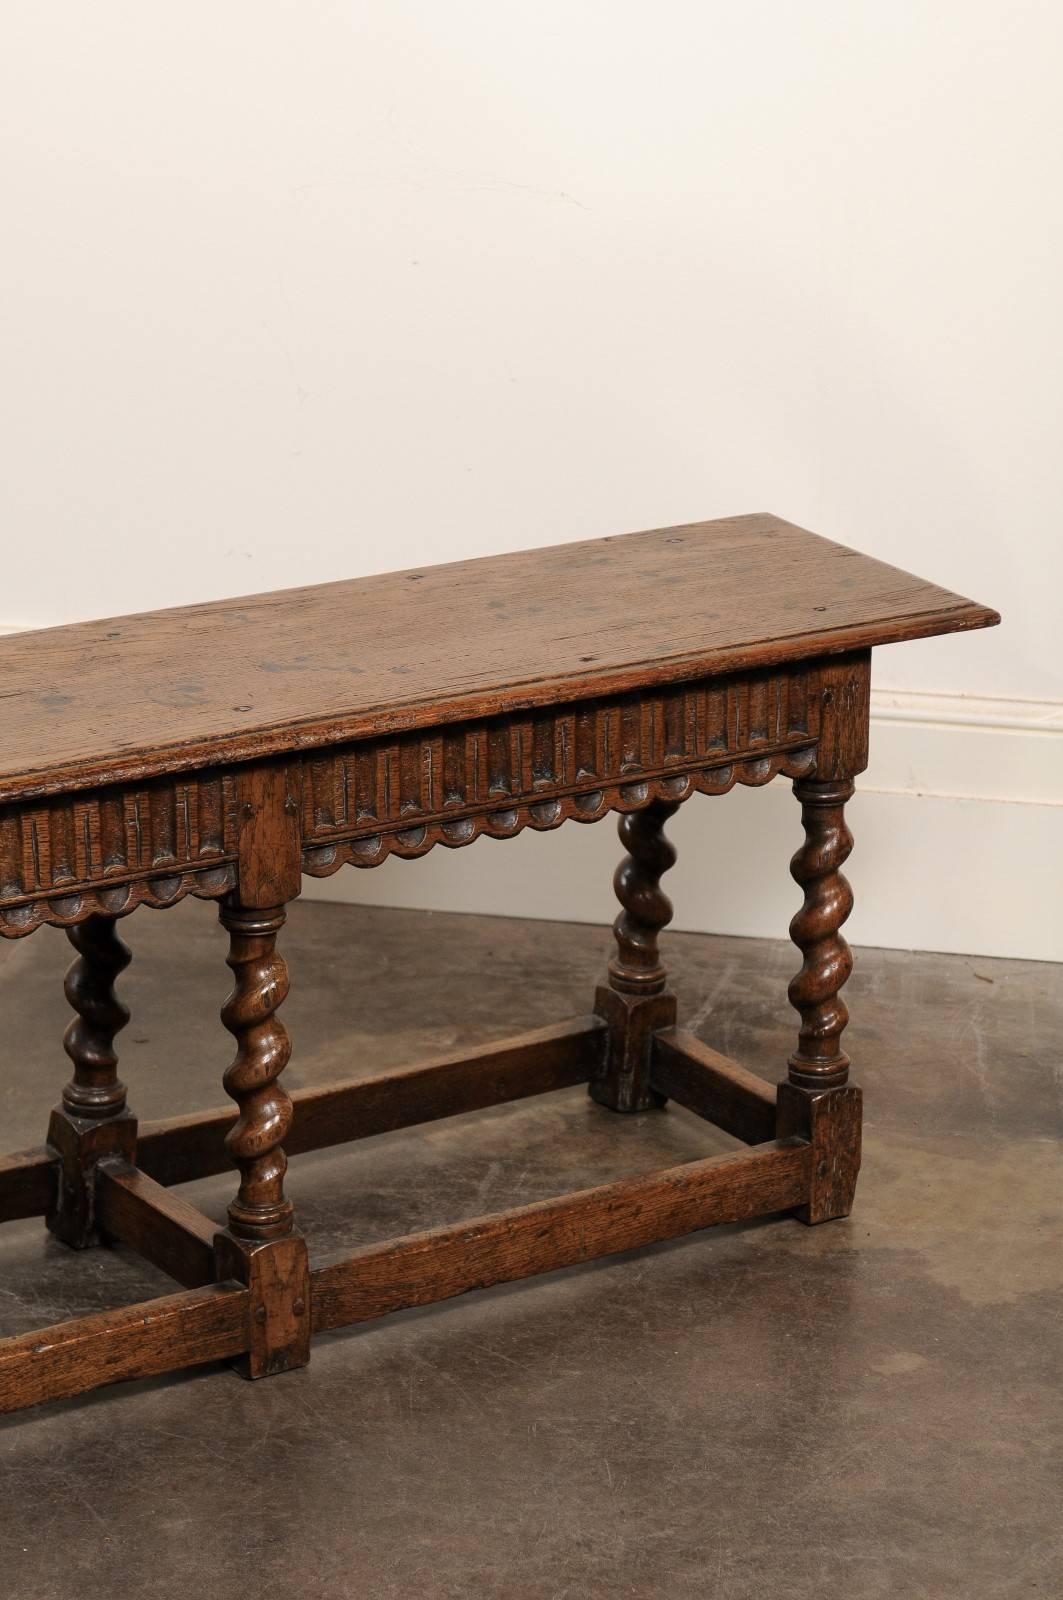 20th Century English Backless Carved Oak Bench with Barley Twist Legs, circa 1920